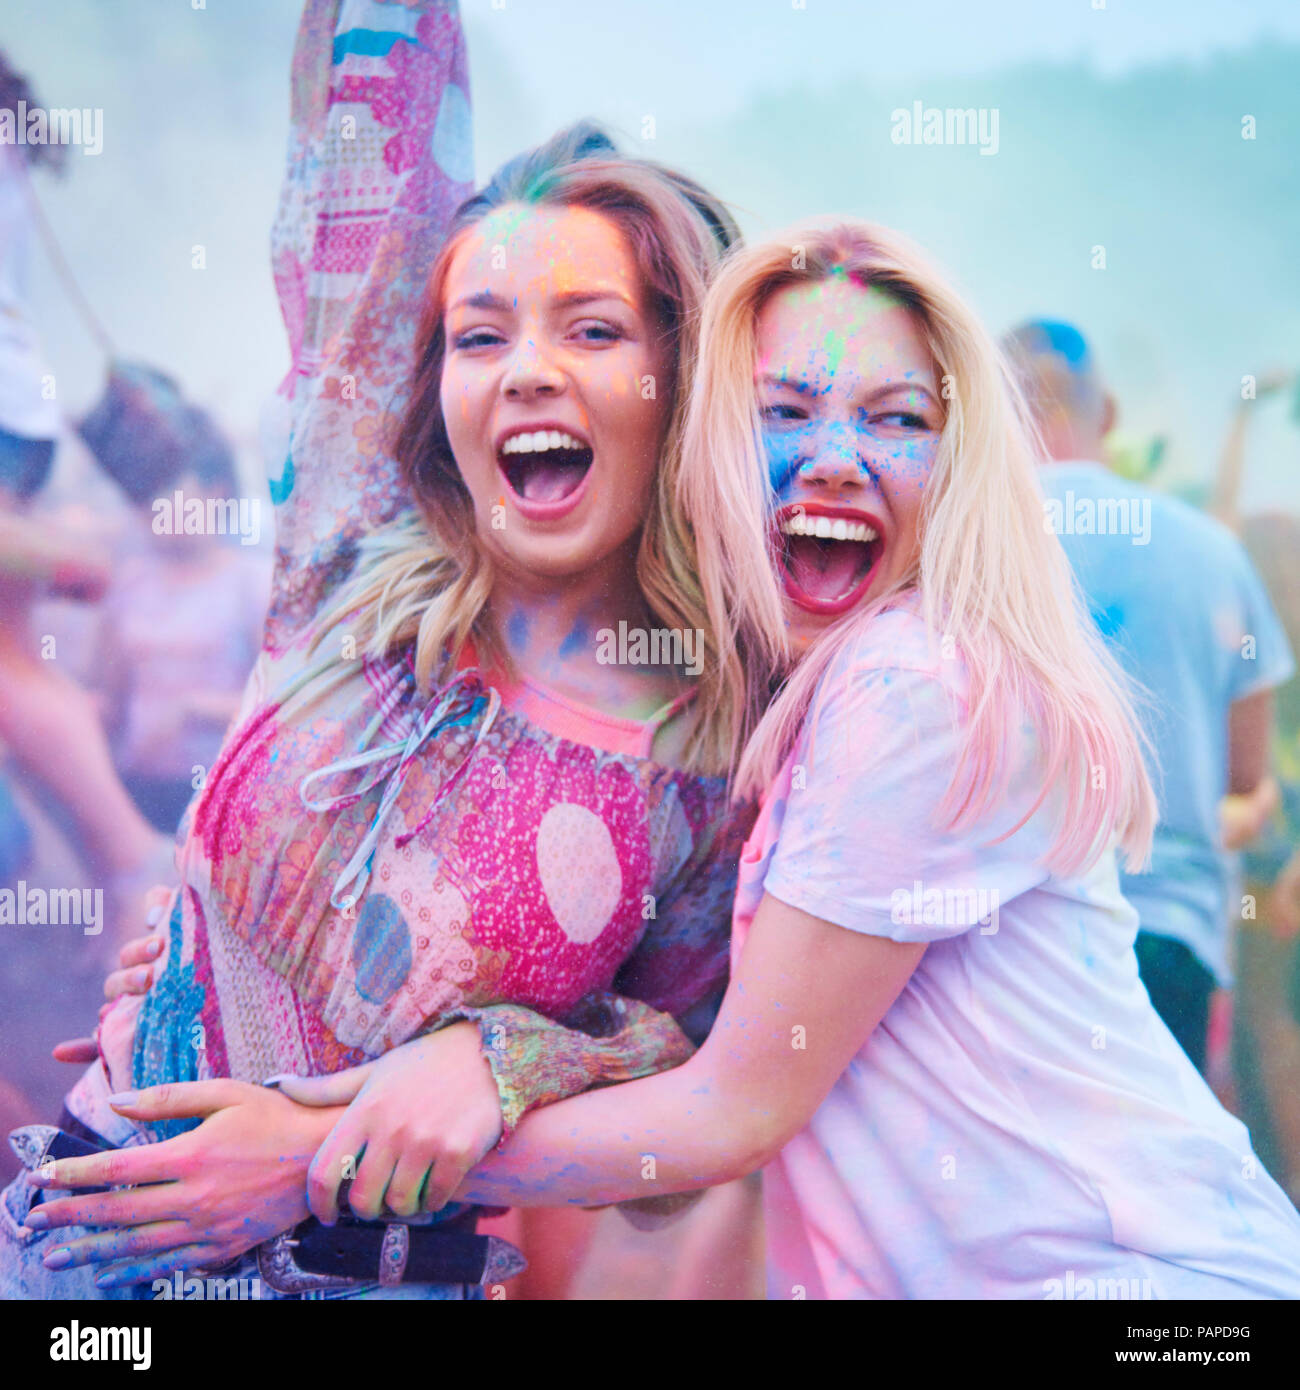 Friends dancing together at music festival Stock Photo